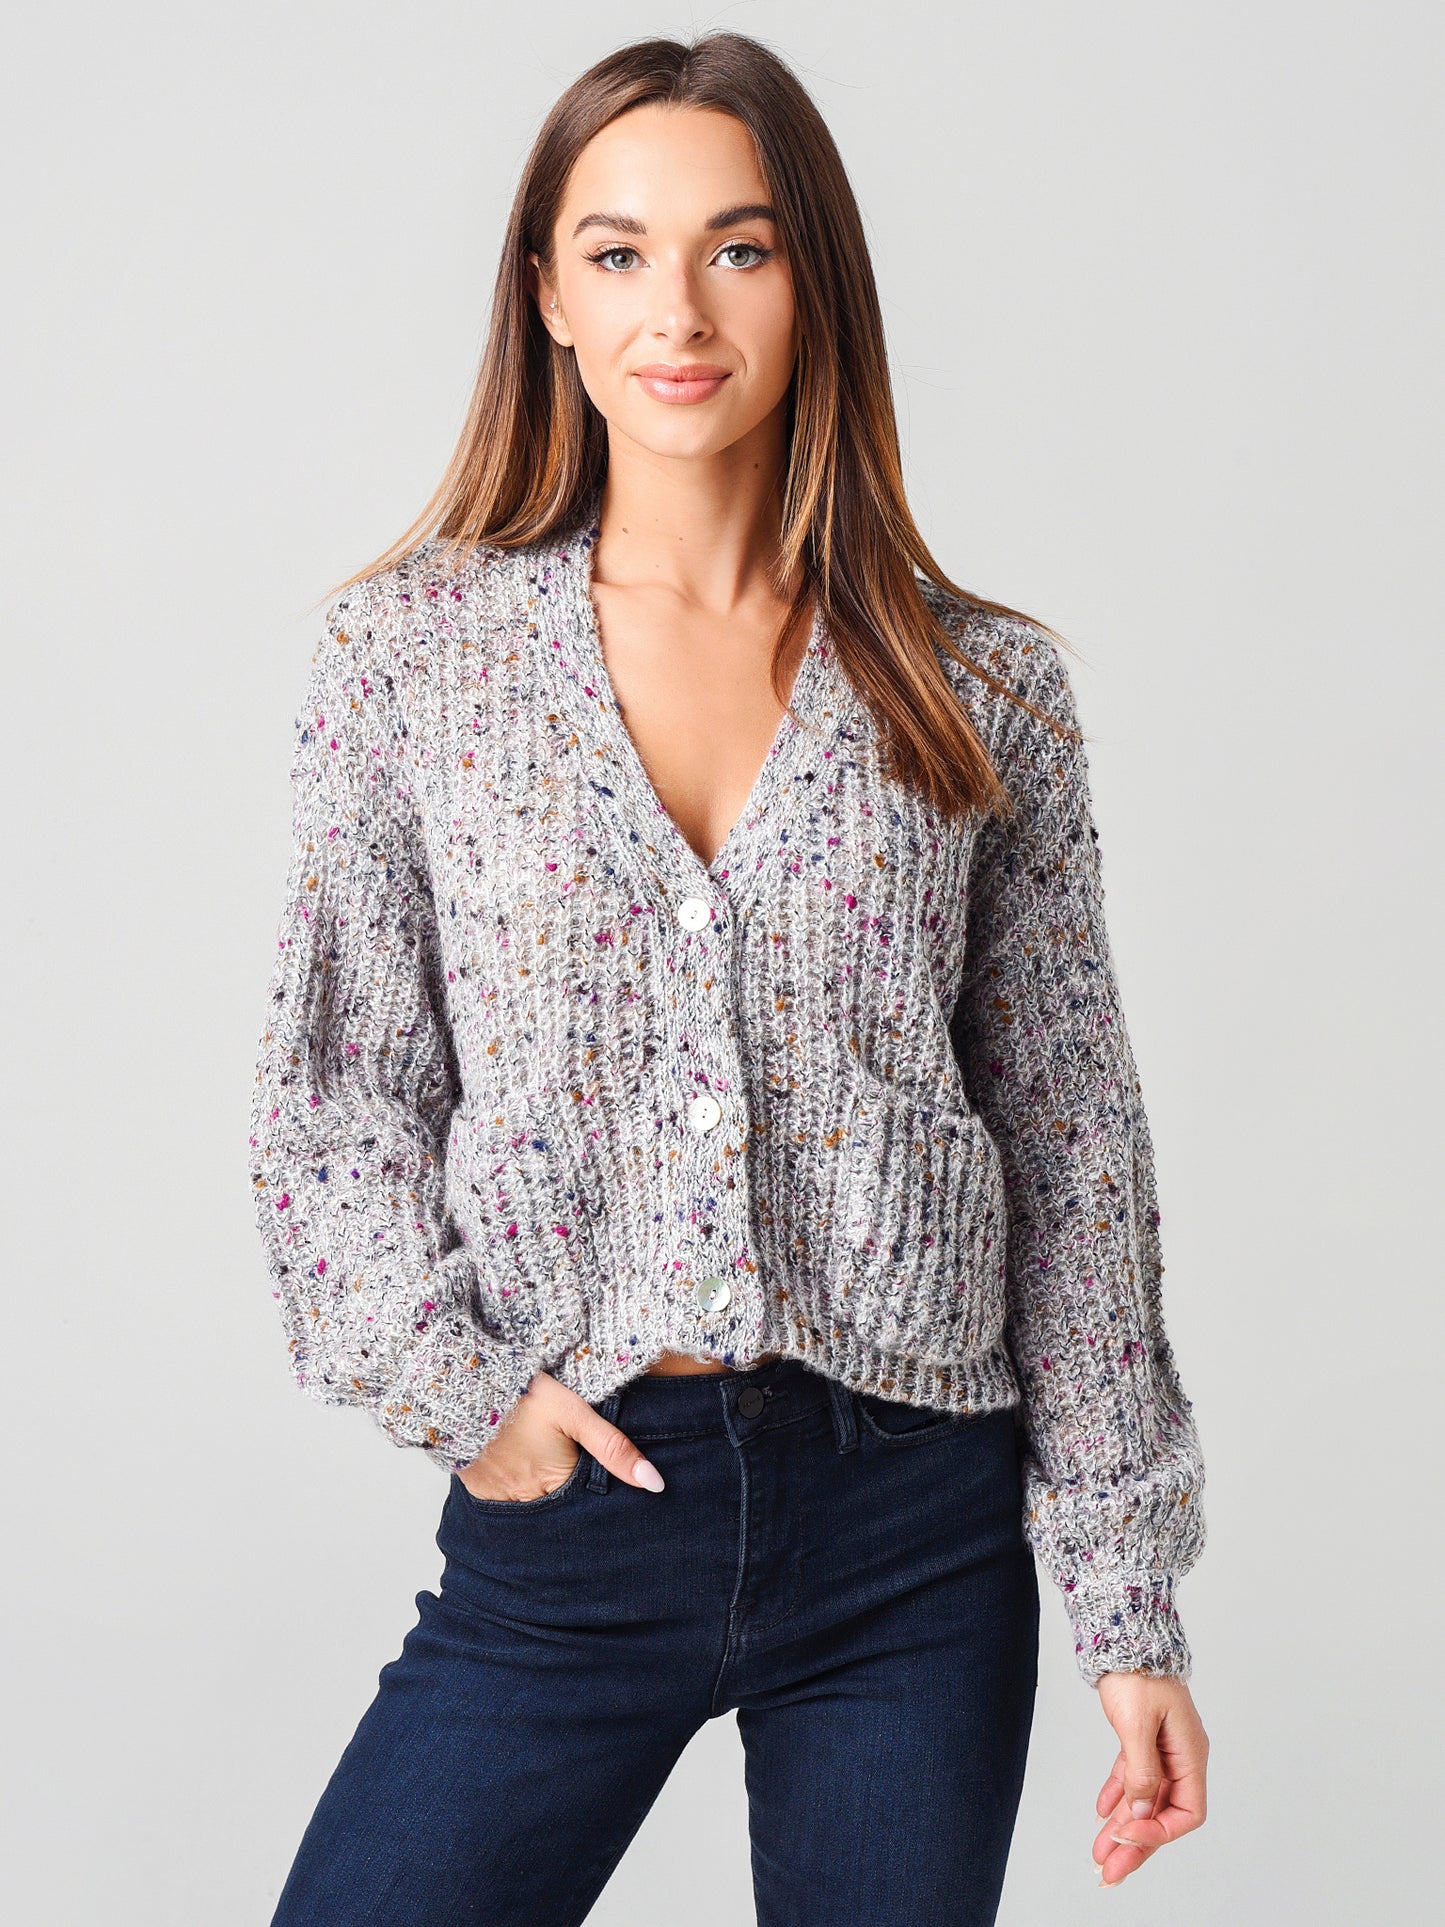 Cupcakes And Cashmere Women's Carlisle Sweater